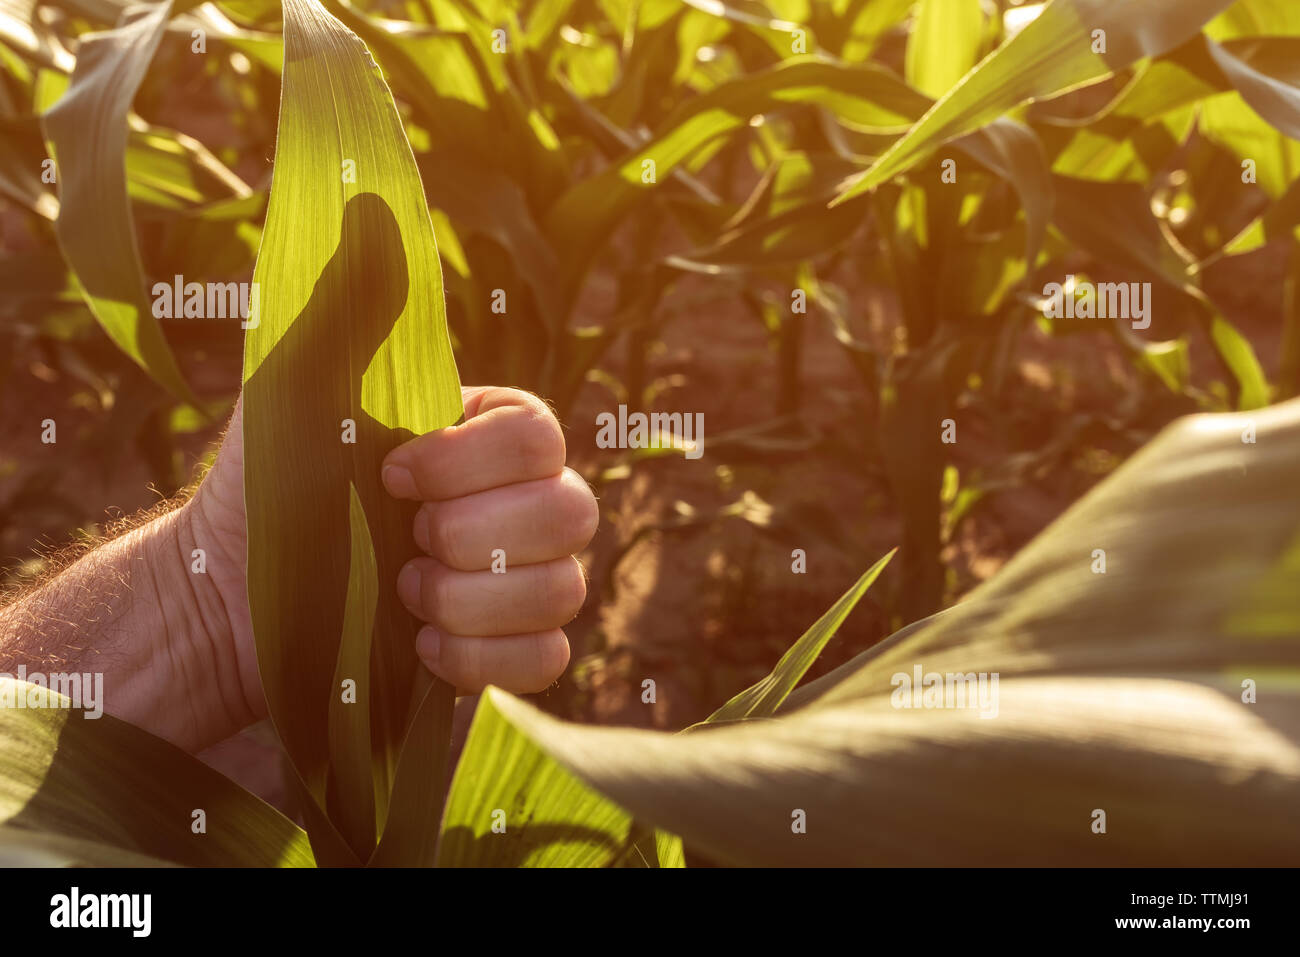 Satisfied farmer gesturing thumbs up in corn field, close up of hand Stock Photo